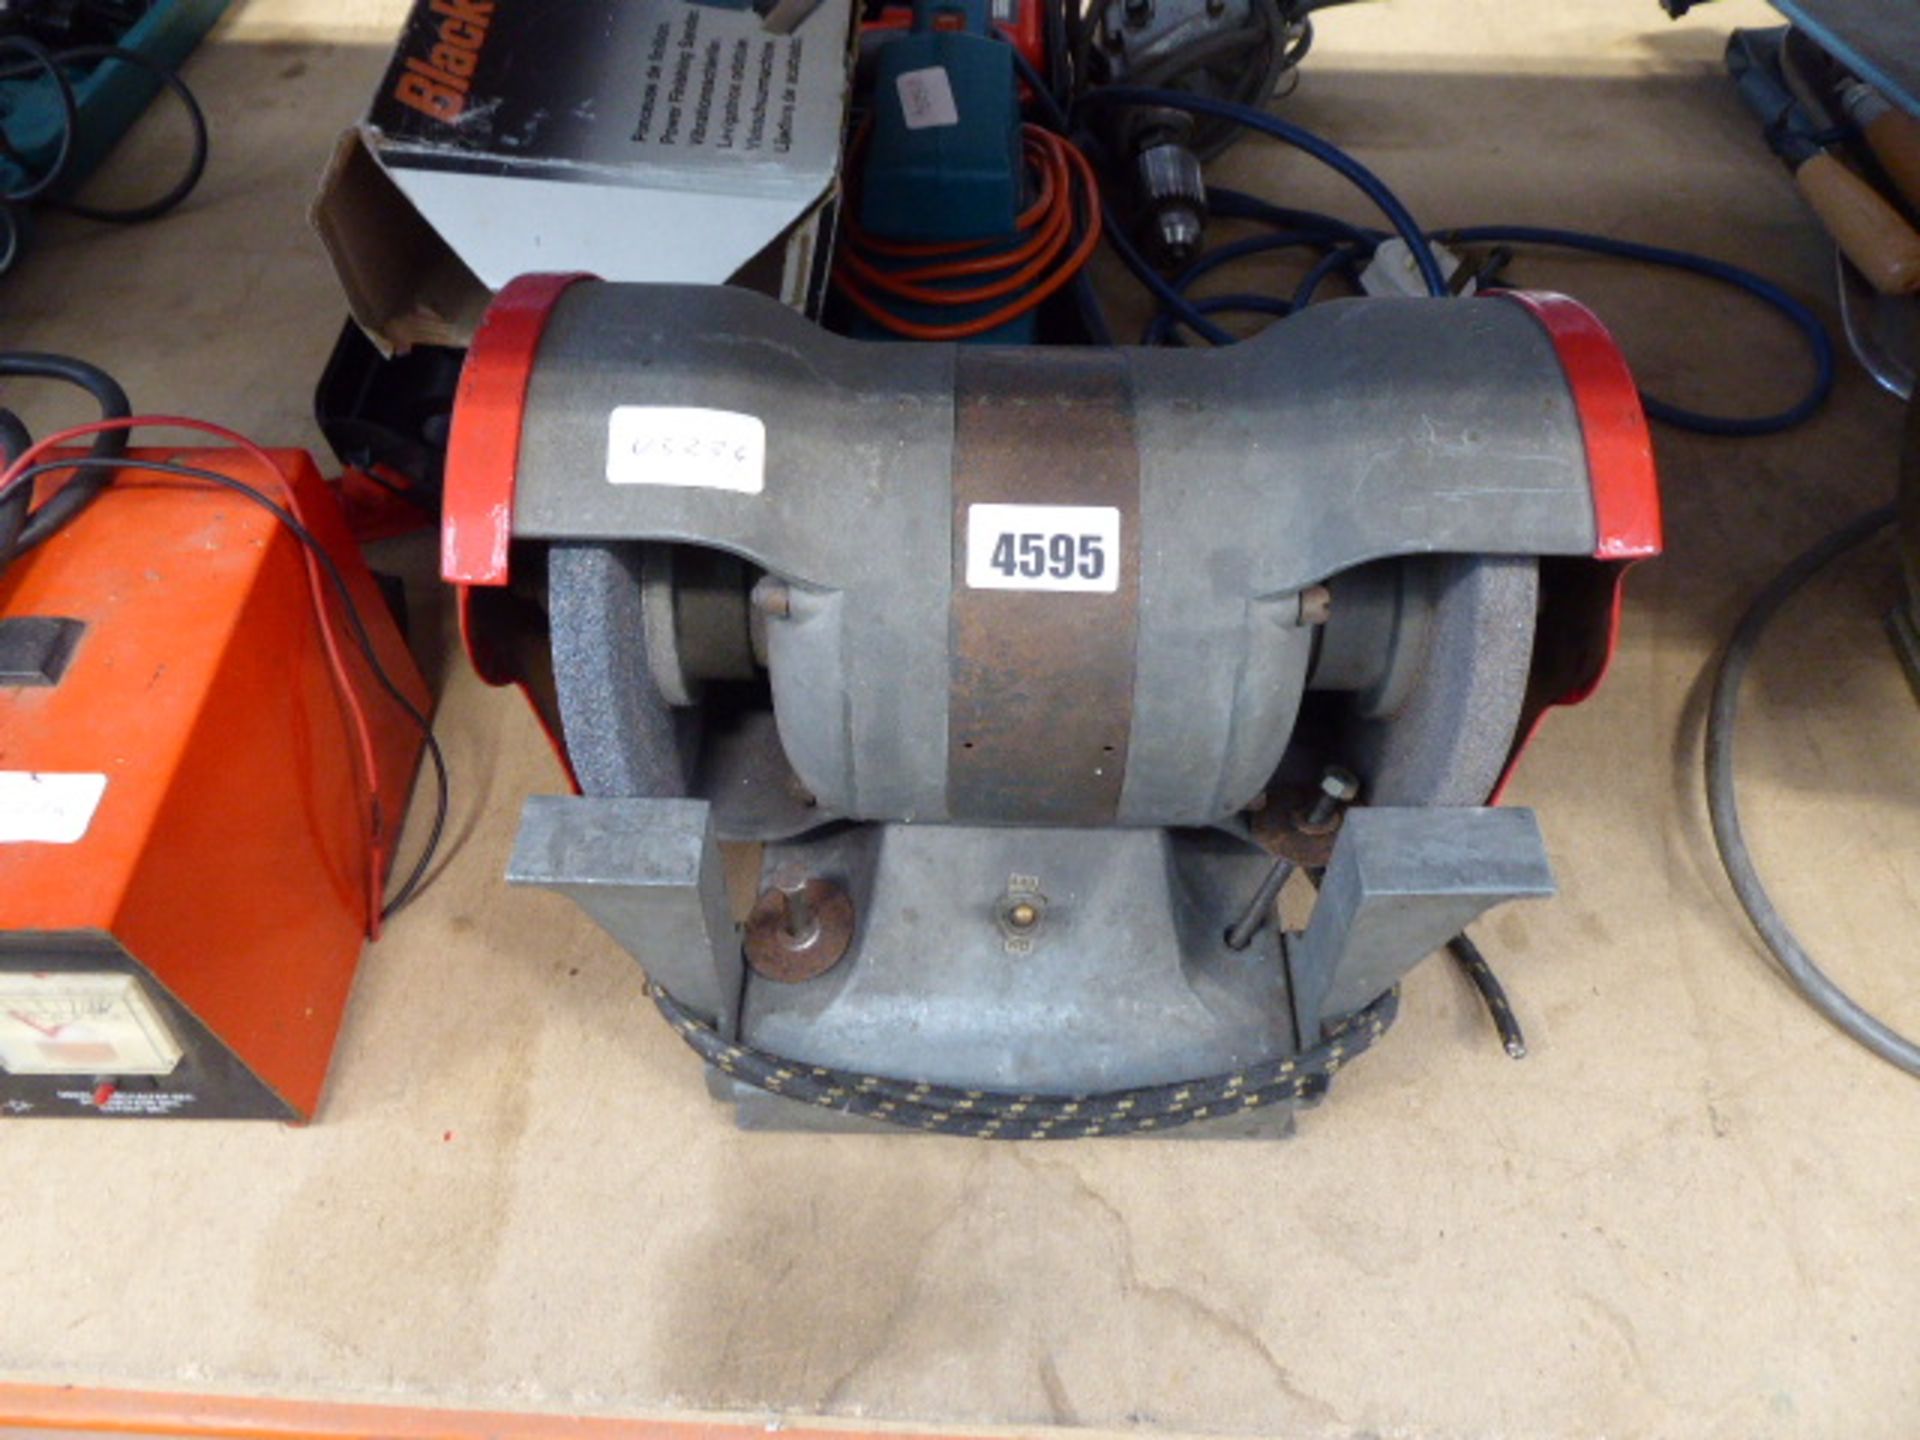 Single phase electric double ended bench grinder